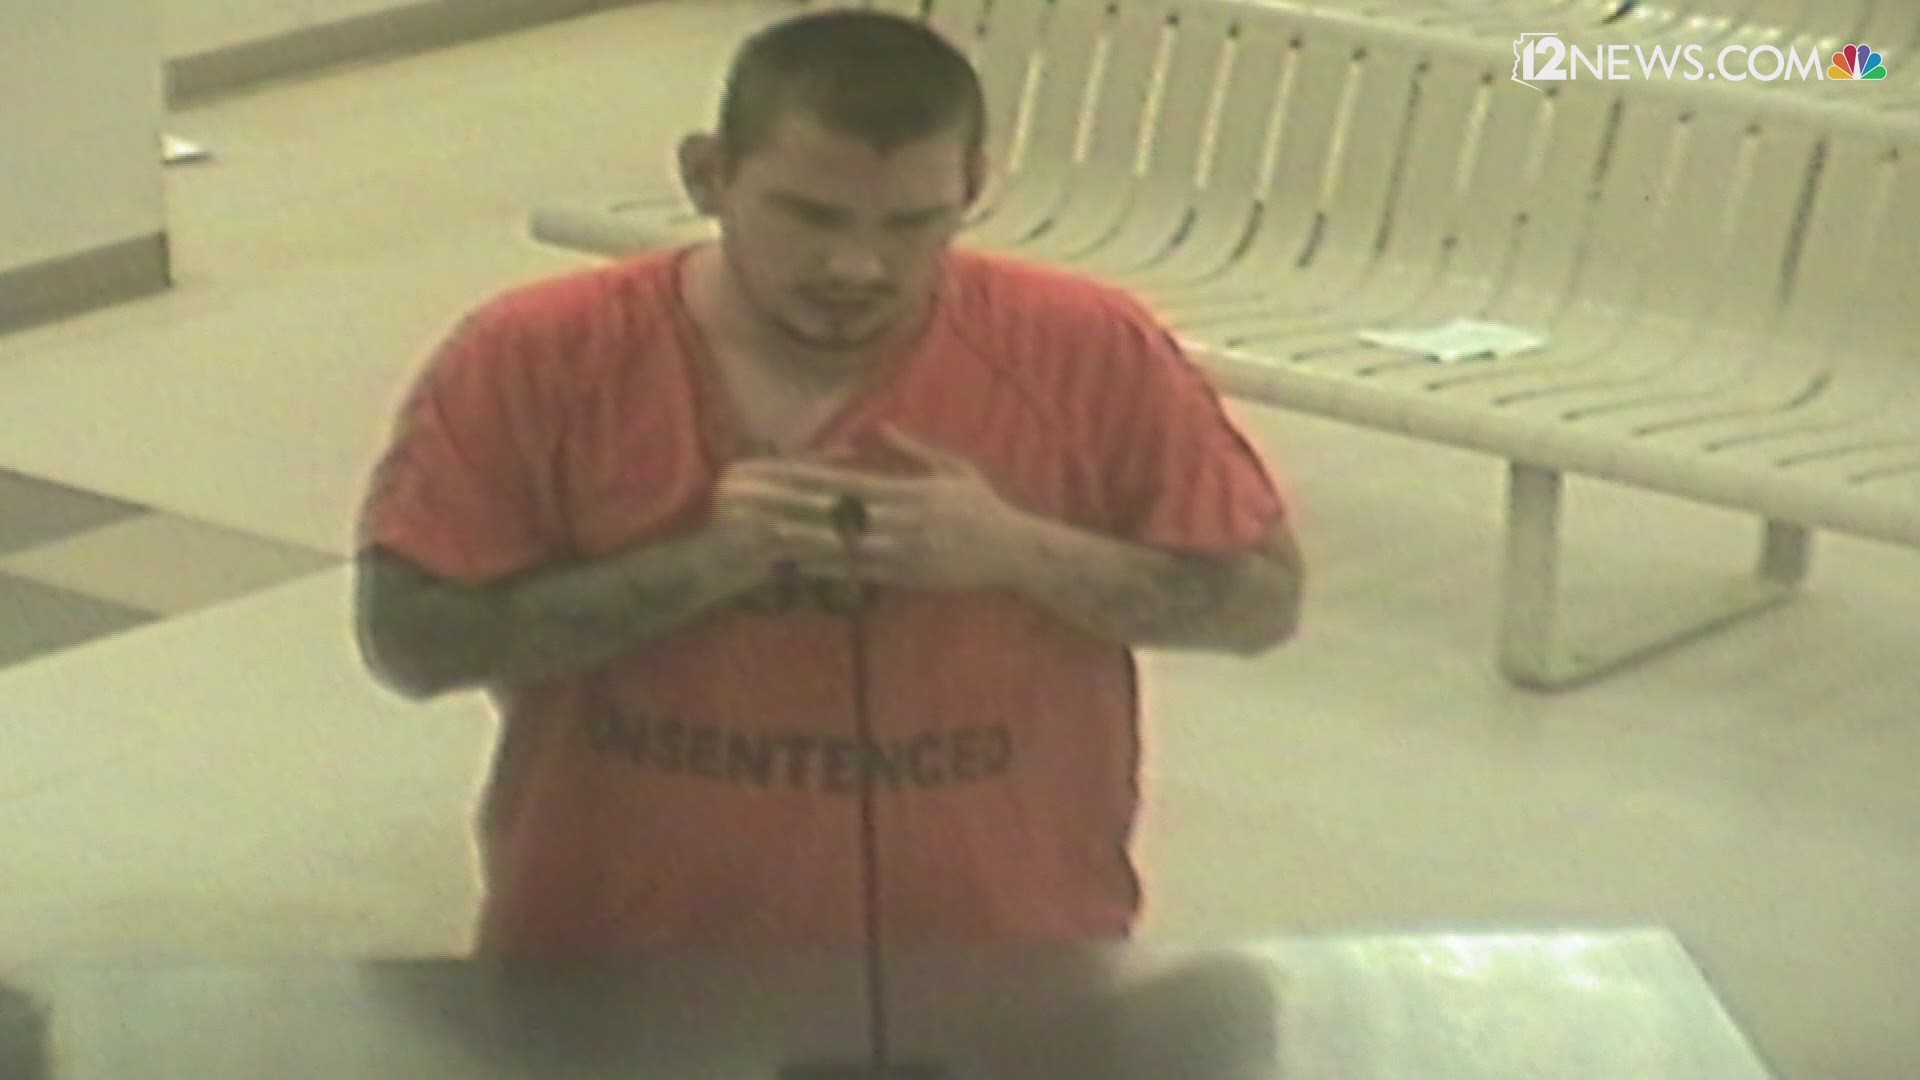 According to police, 26-year-old Eldon Mcinville was booked on charges of child abuse and aggravated assault with a deadly weapon. Mcinville appeared in court Friday afternoon and visibly broke down as the charges against him and the conditions of his release were read to the court.